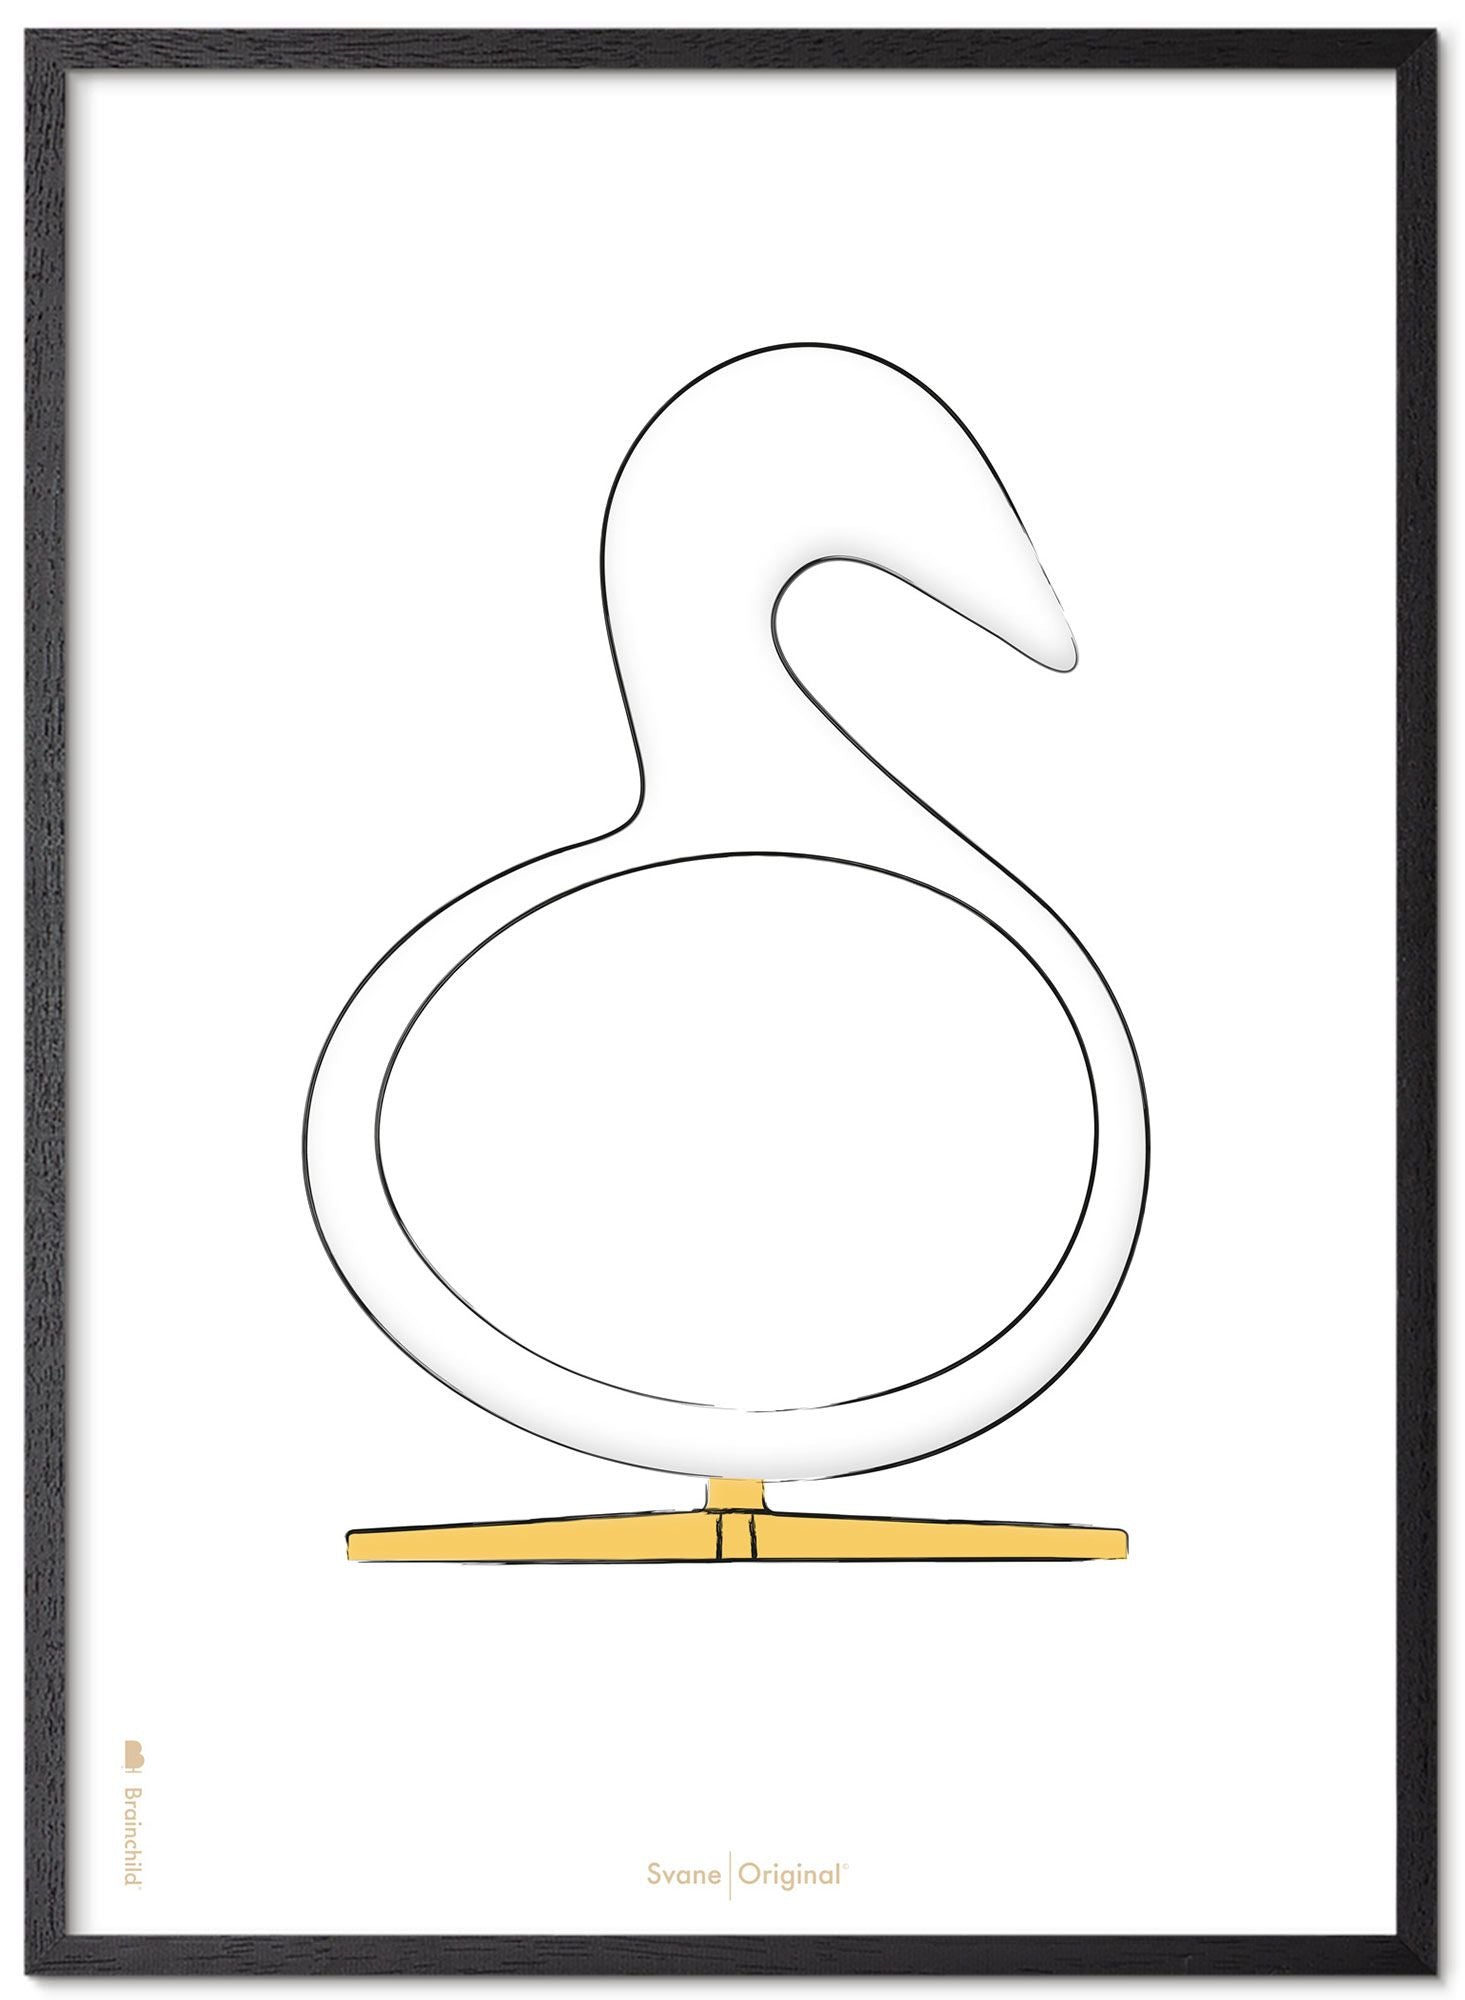 Brainchild Swan Design Sketch Poster Frame Made Of Black Lacquered Wood A5, White Background